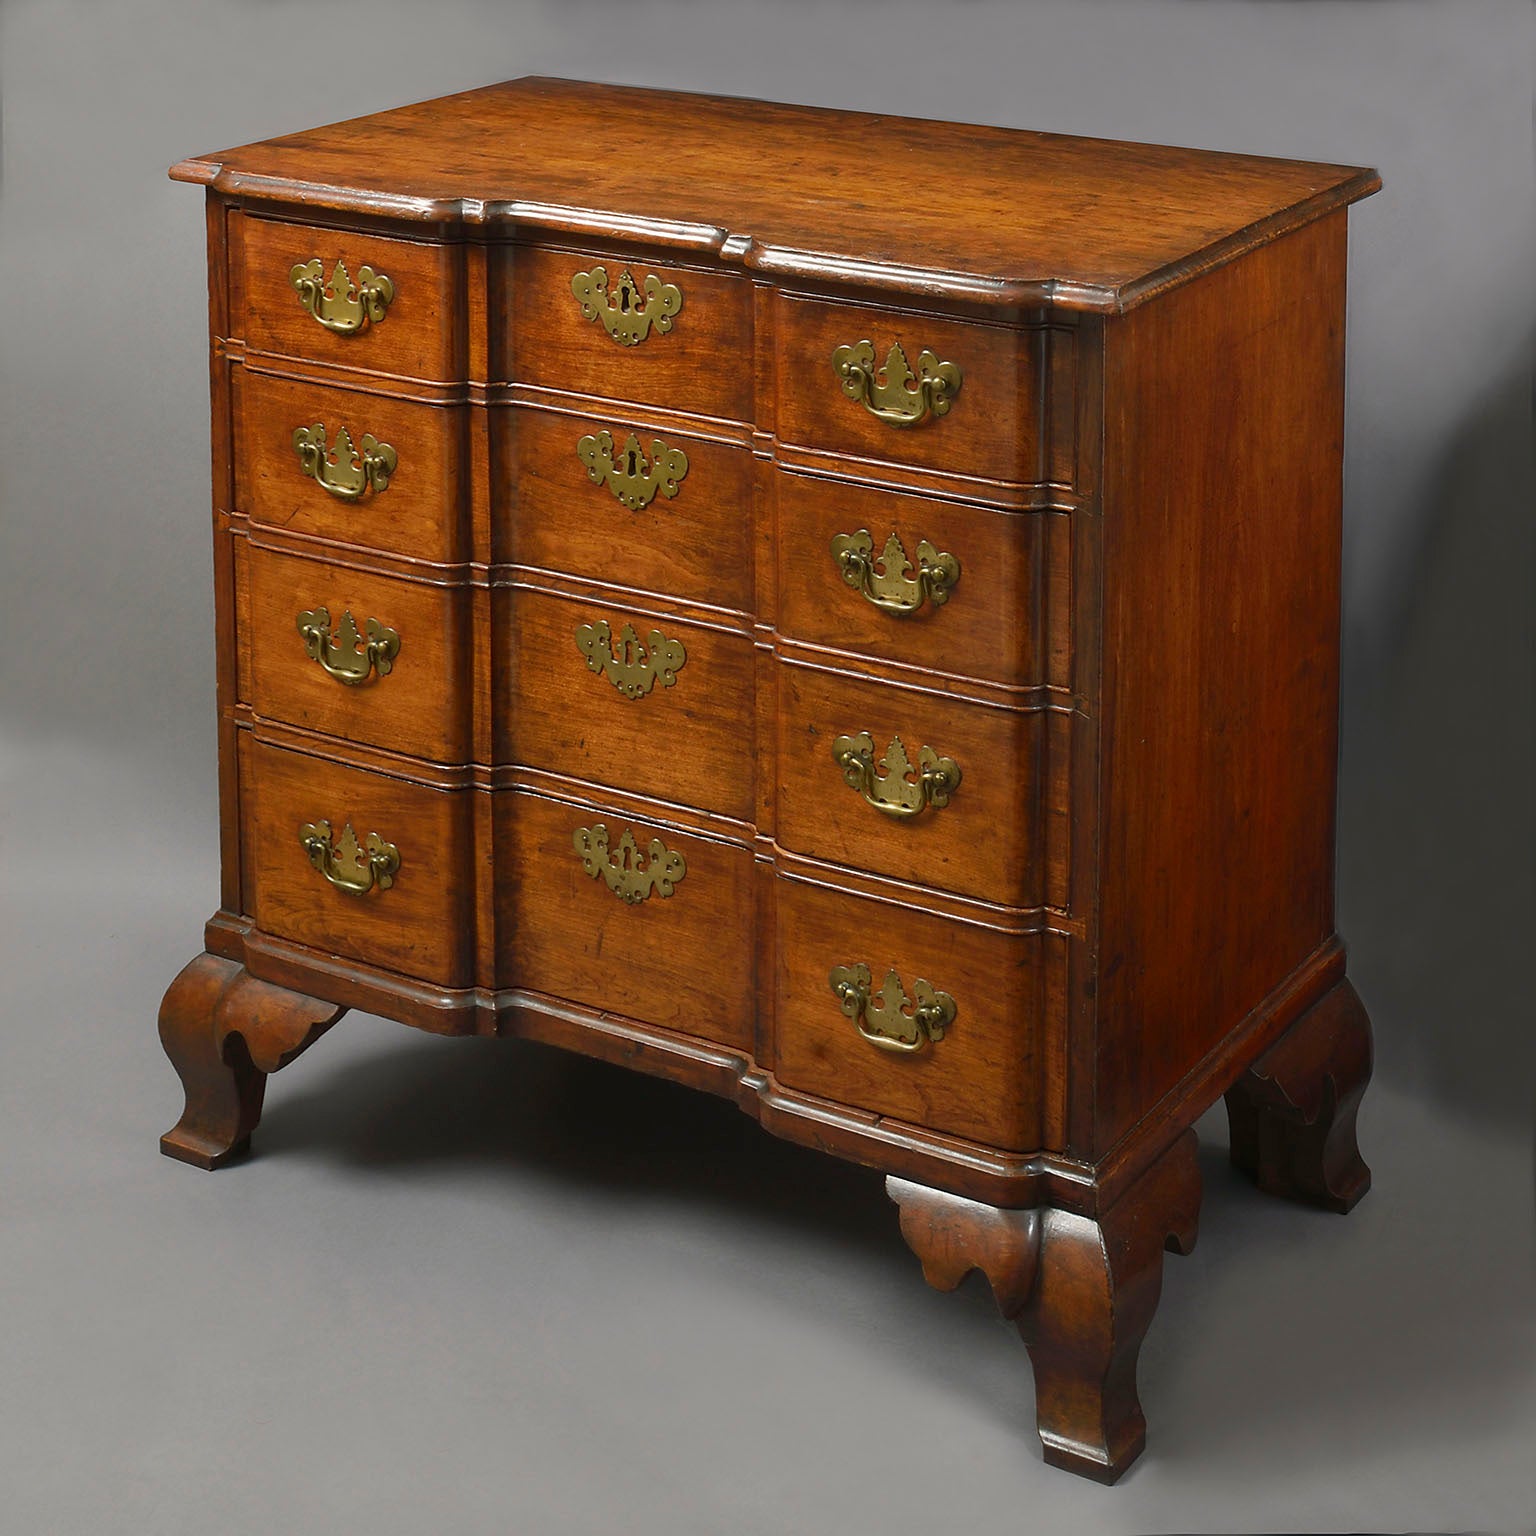 American Cherry Wood Block-Front Chest of the Chippendale Period